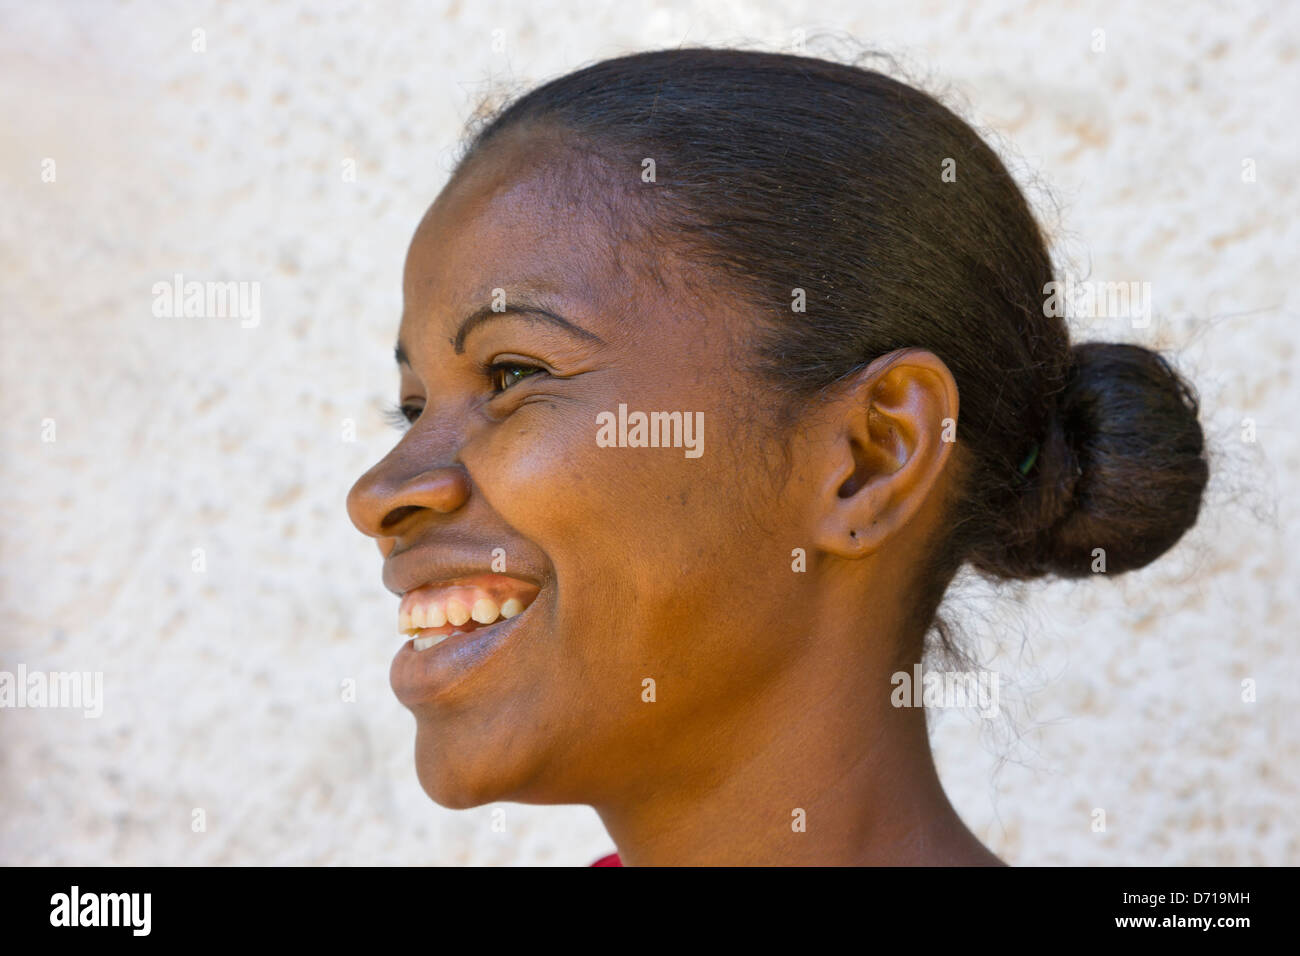 Portrait of a young girl, Nosy Be, Madagascar Stock Photo